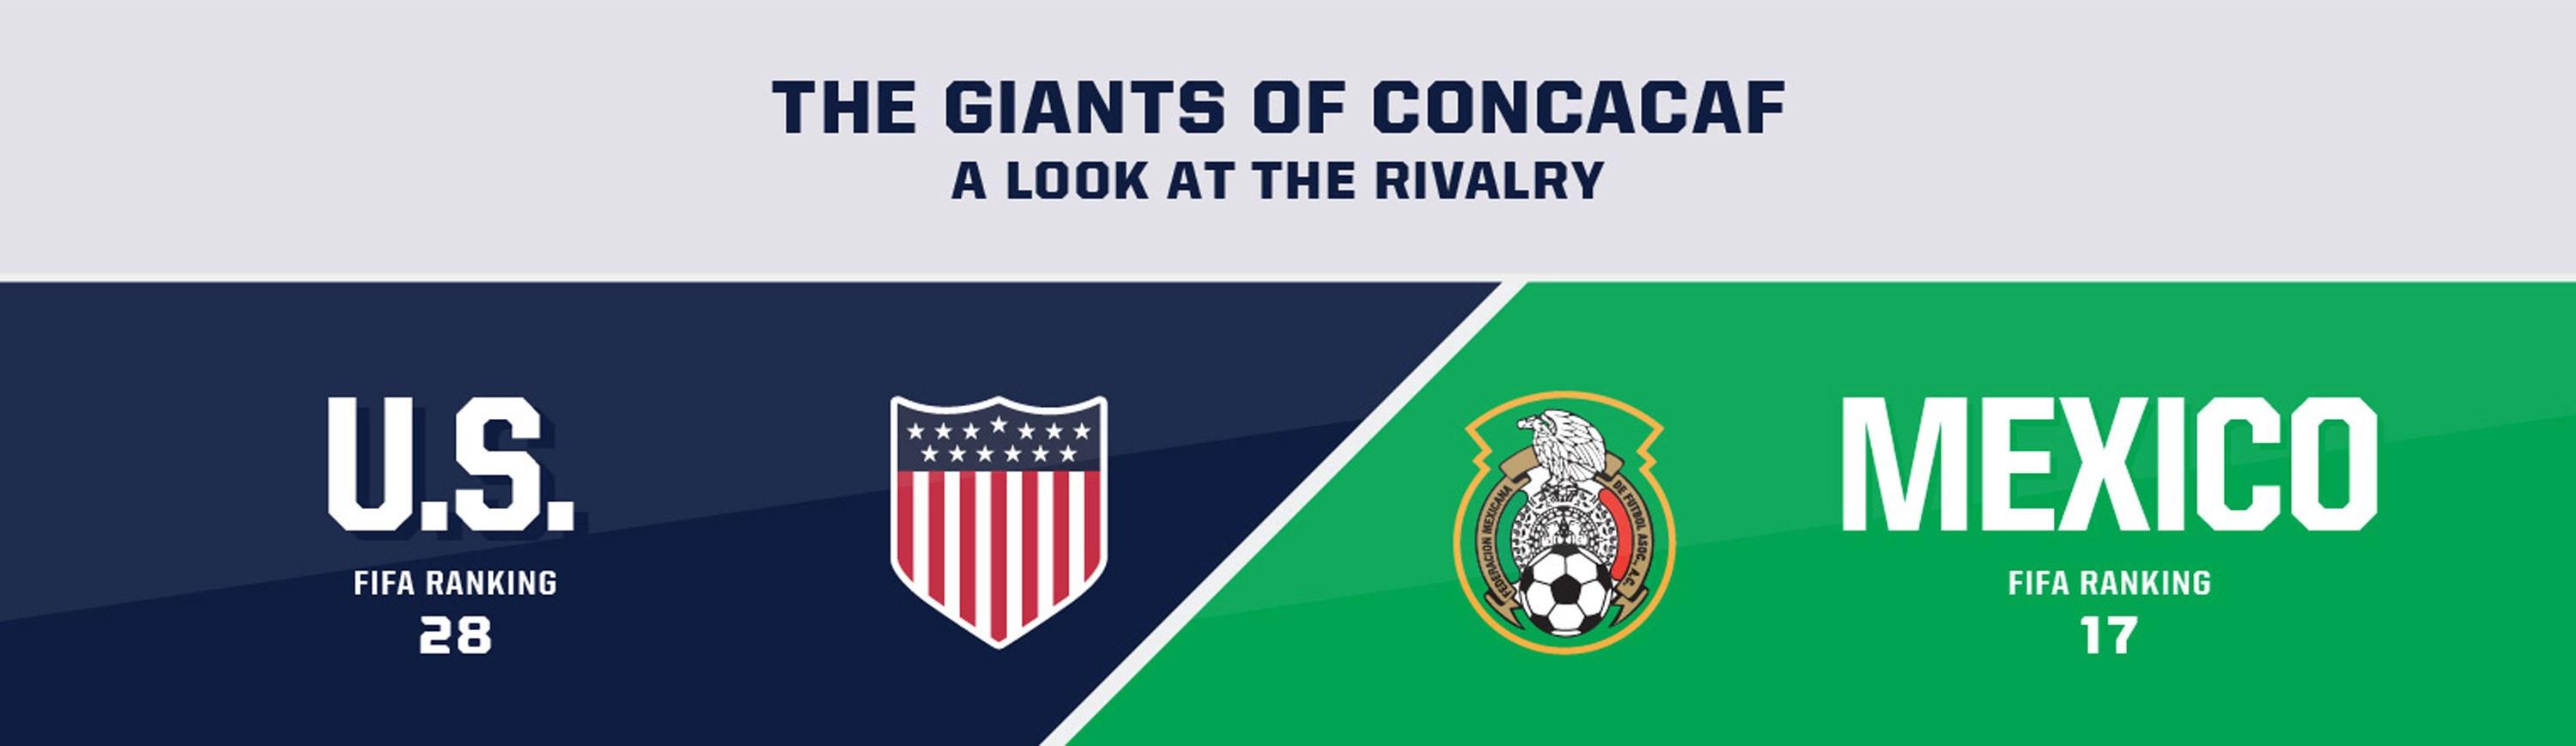 Graphic titled “The Giants of CONCACAF: A Look at the Rivalry” showing the FIFA rankings of the U.S. and Mexico national soccer teams. The U.S. is ranked 28th, with an emblem featuring stars and stripes, and Mexico is ranked 17th, with an emblem featuring an eagle and a ball.